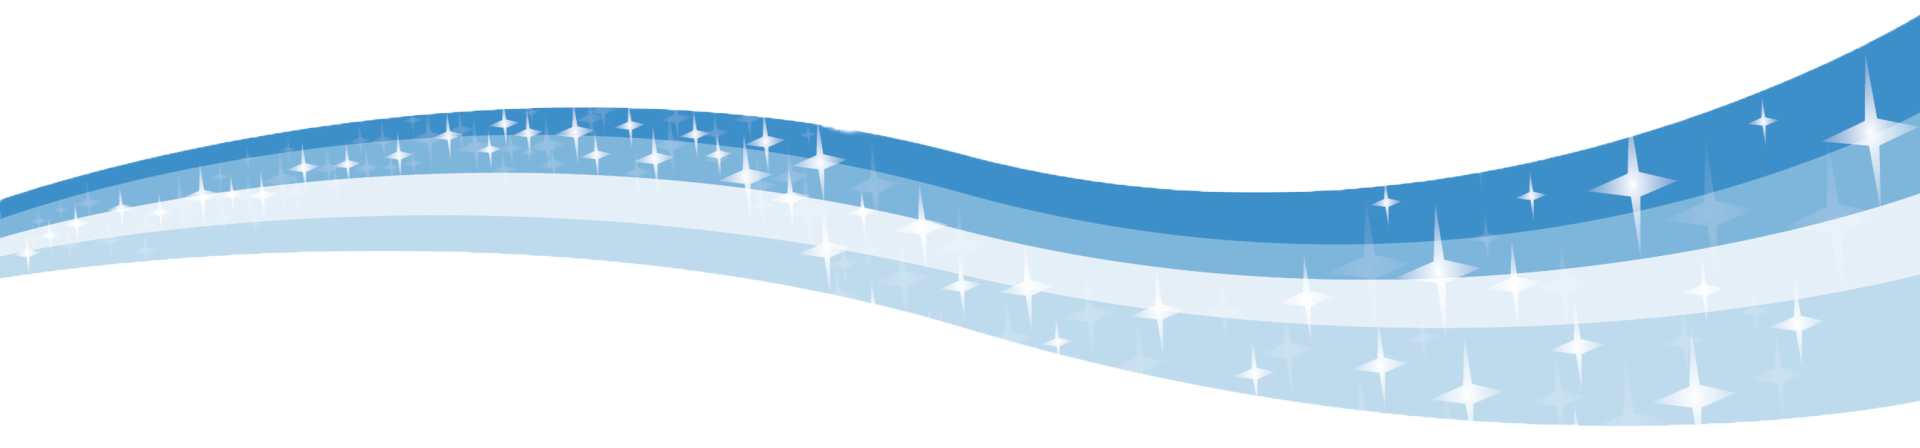 Waves Repin Image Blue Wave Border On Clipart